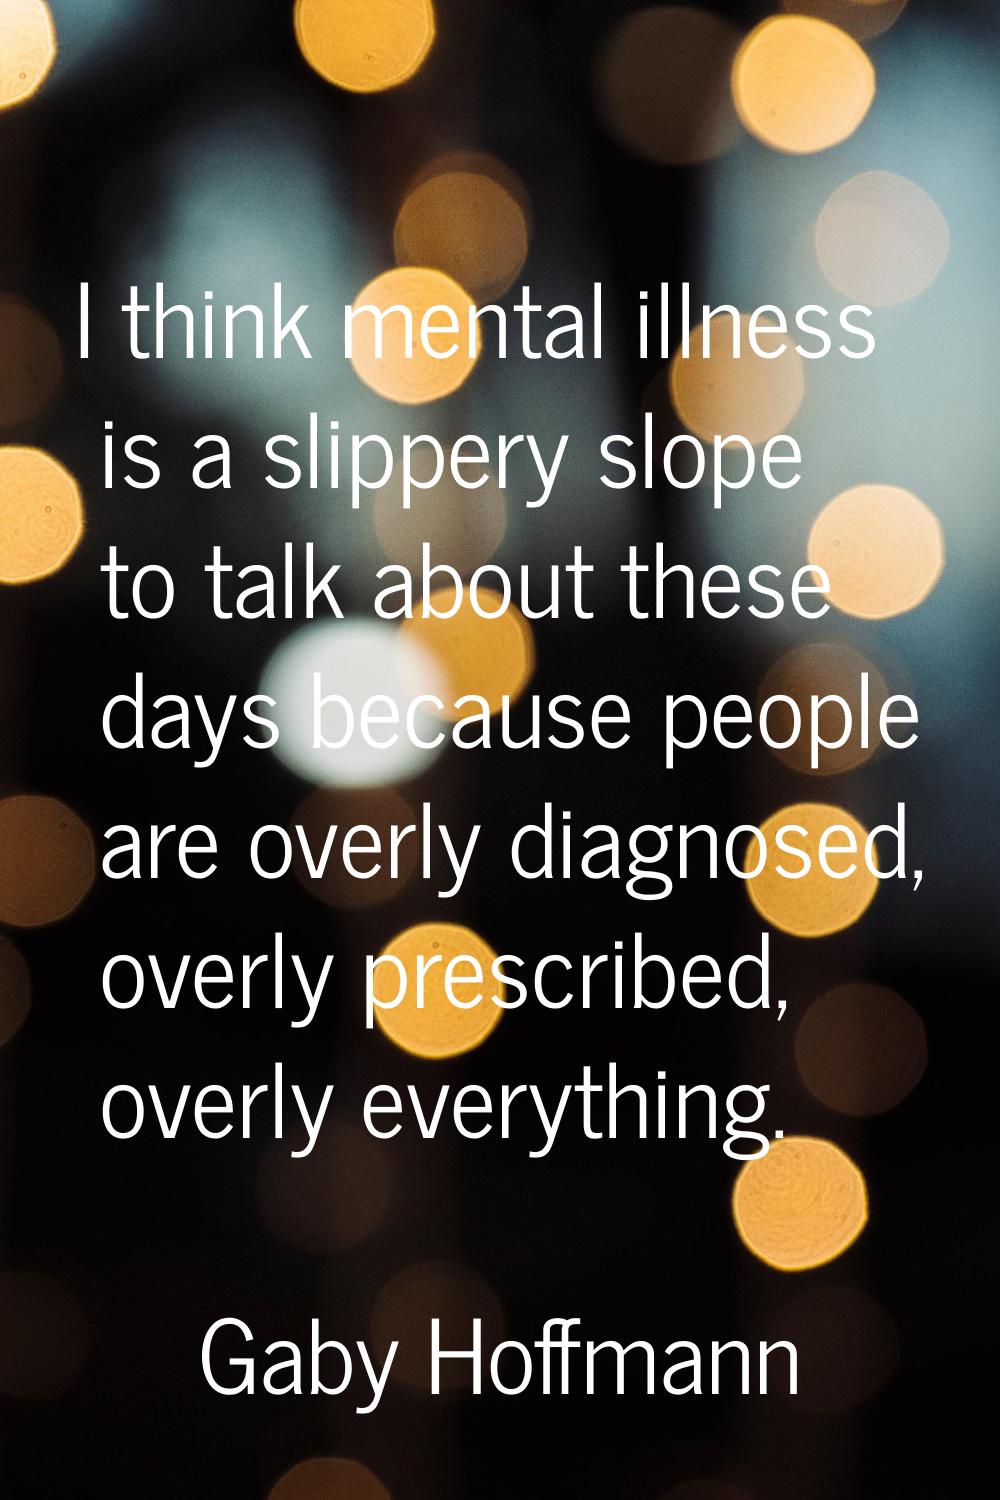 I think mental illness is a slippery slope to talk about these days because people are overly diagn